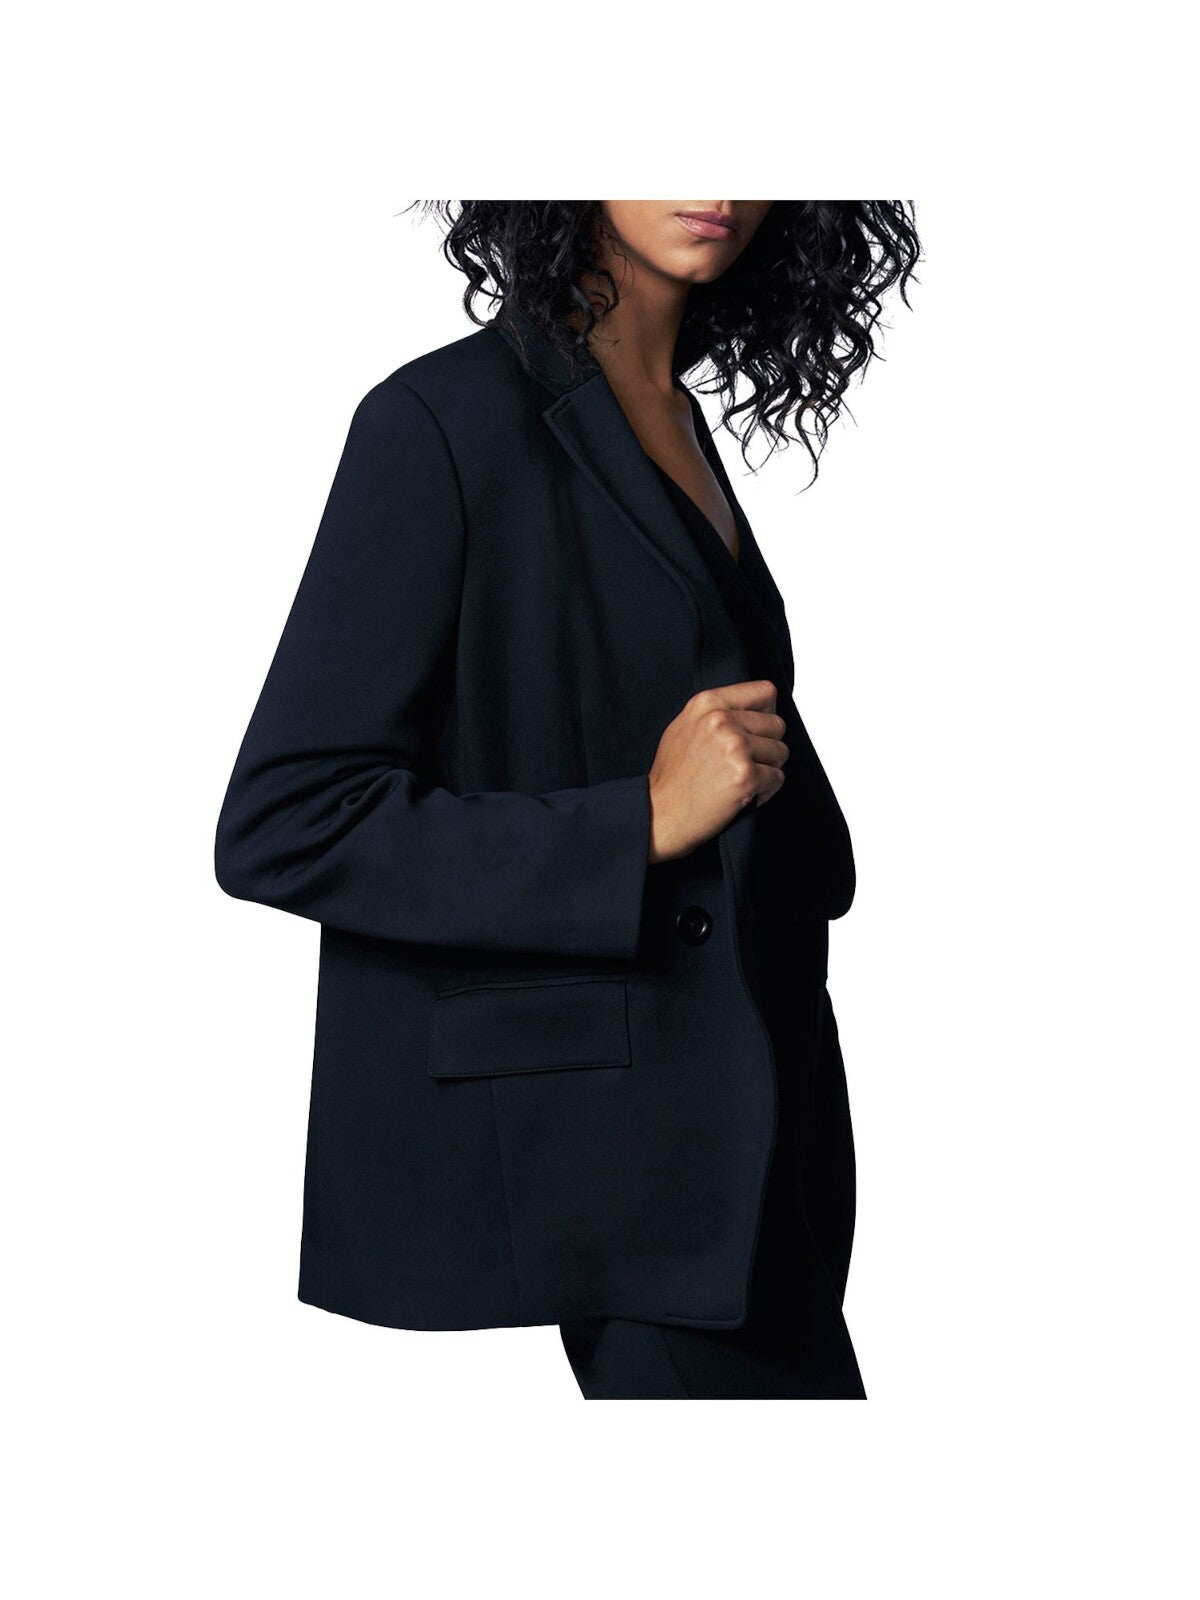 B NEW YORK Womens Stretch Pocketed Faux Double-breasted Wear To Work Blazer Jacket